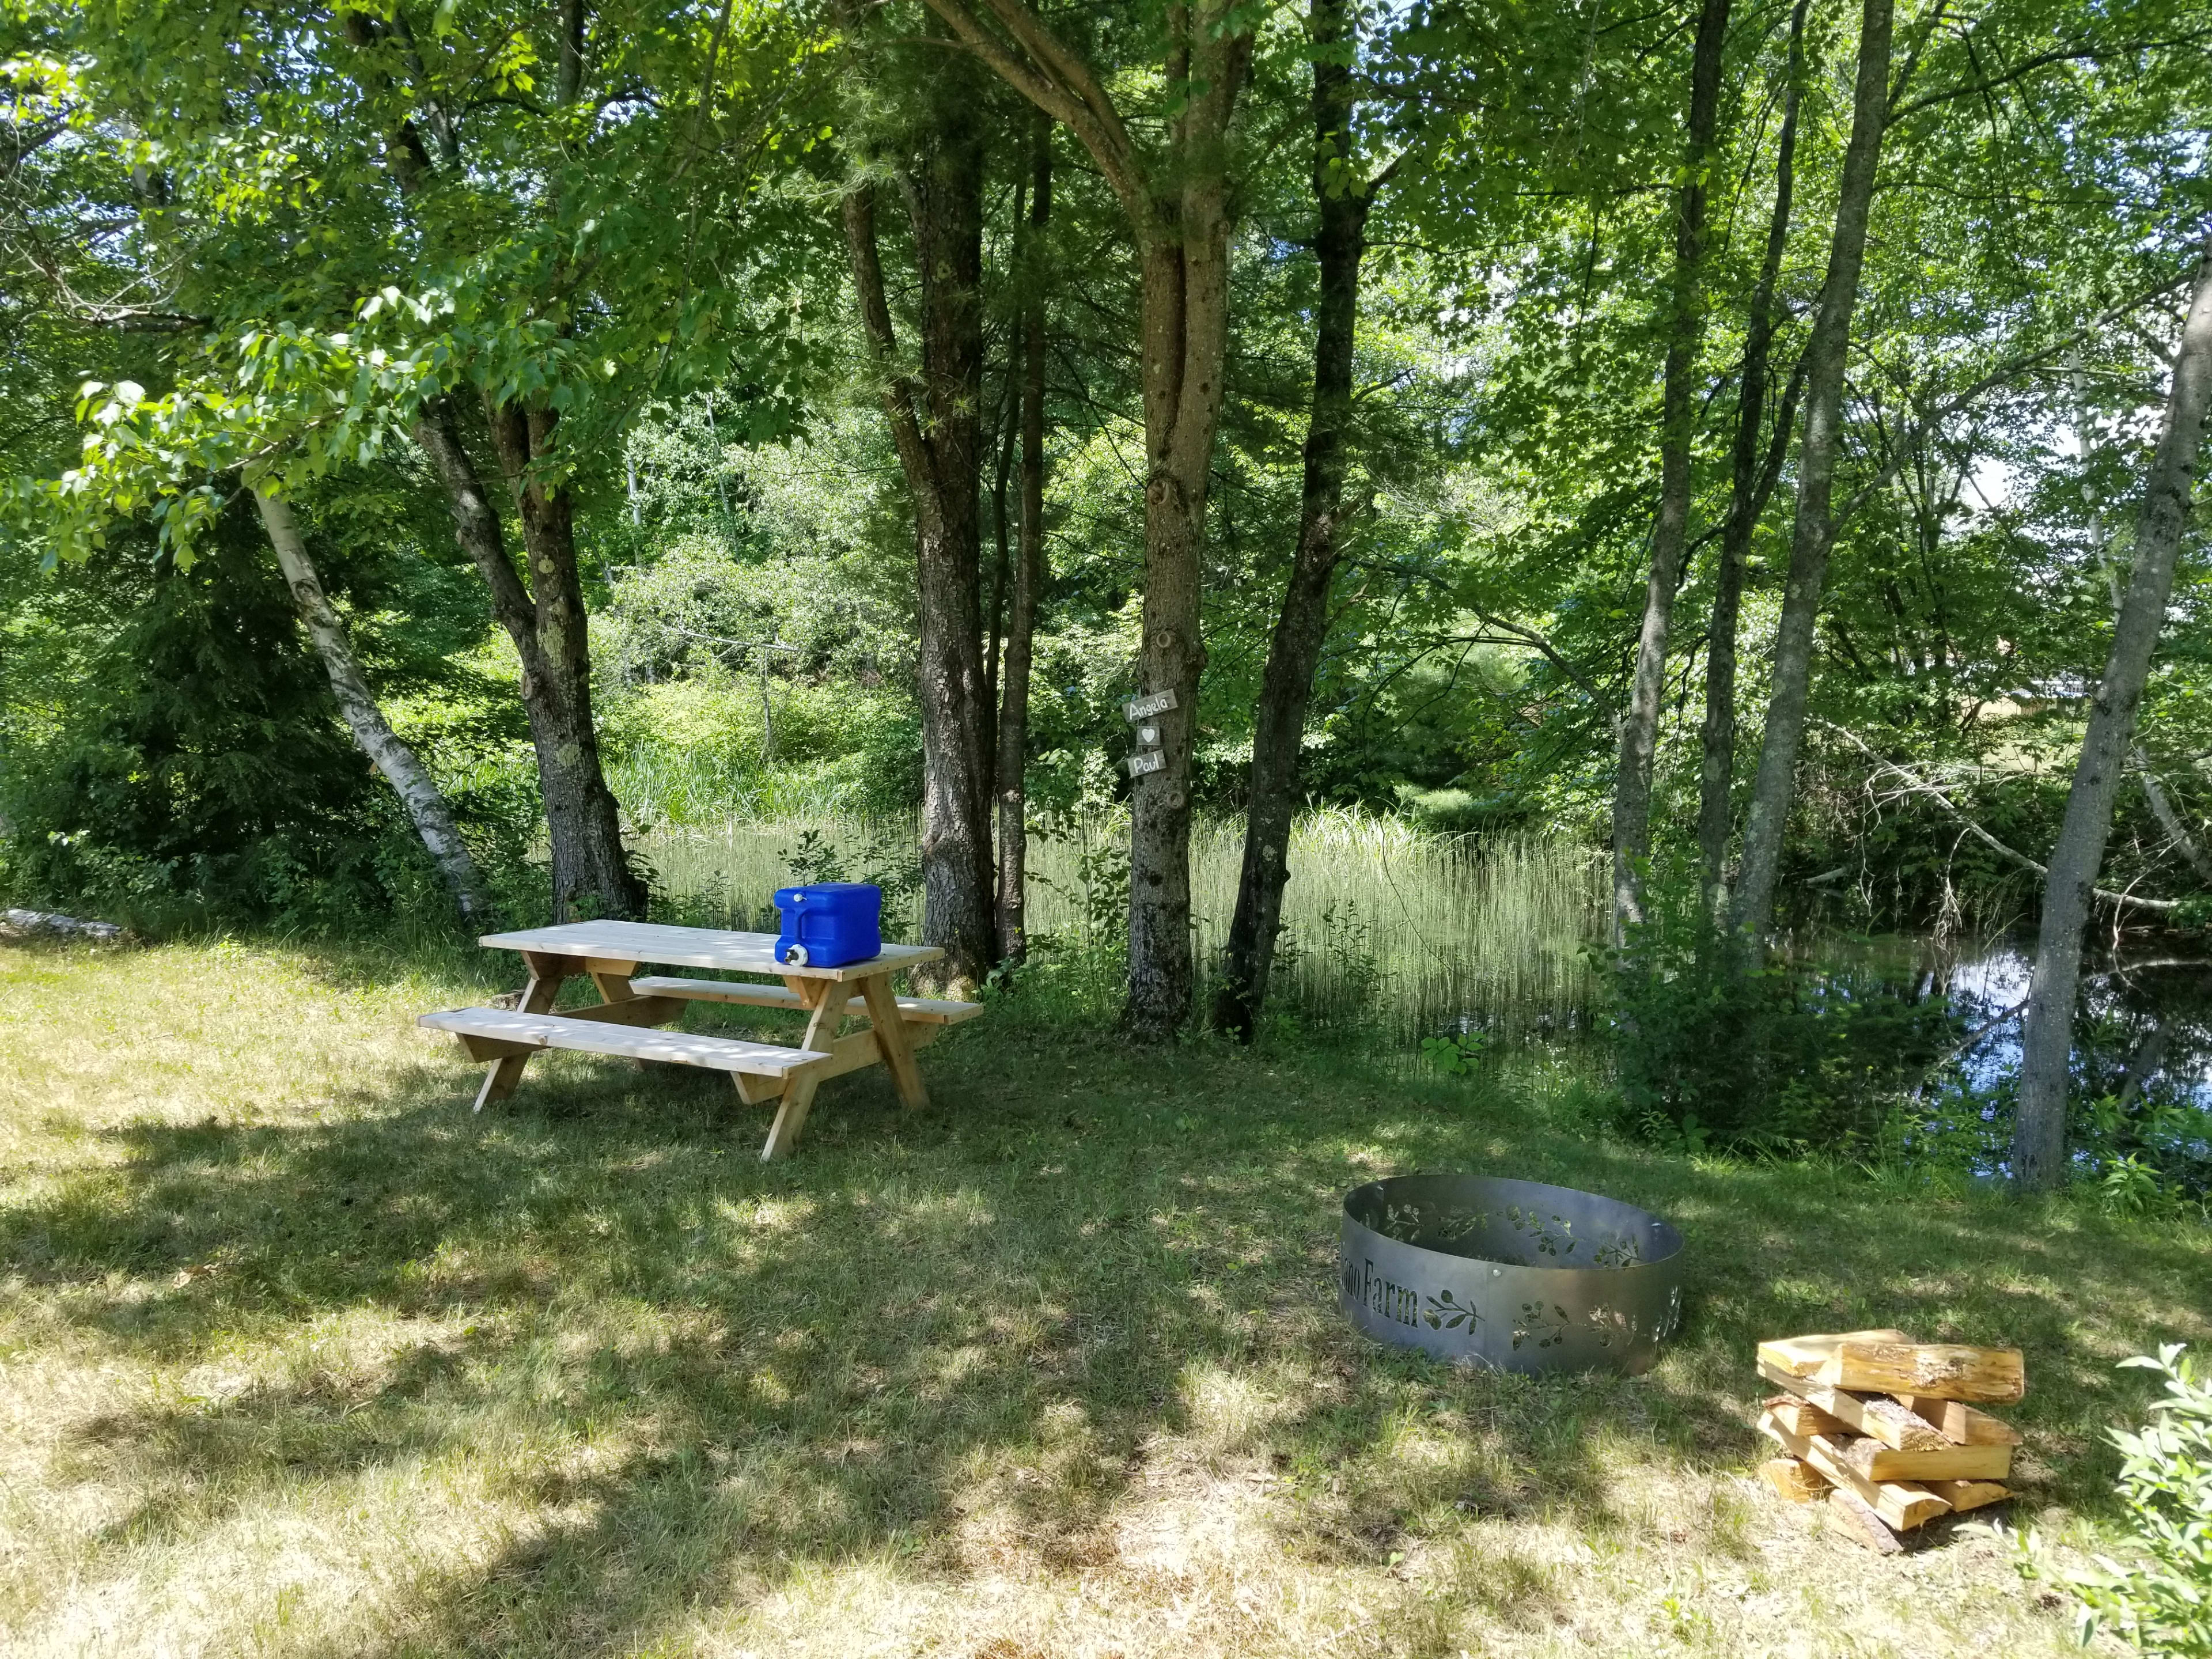 Nice shady spot to relax